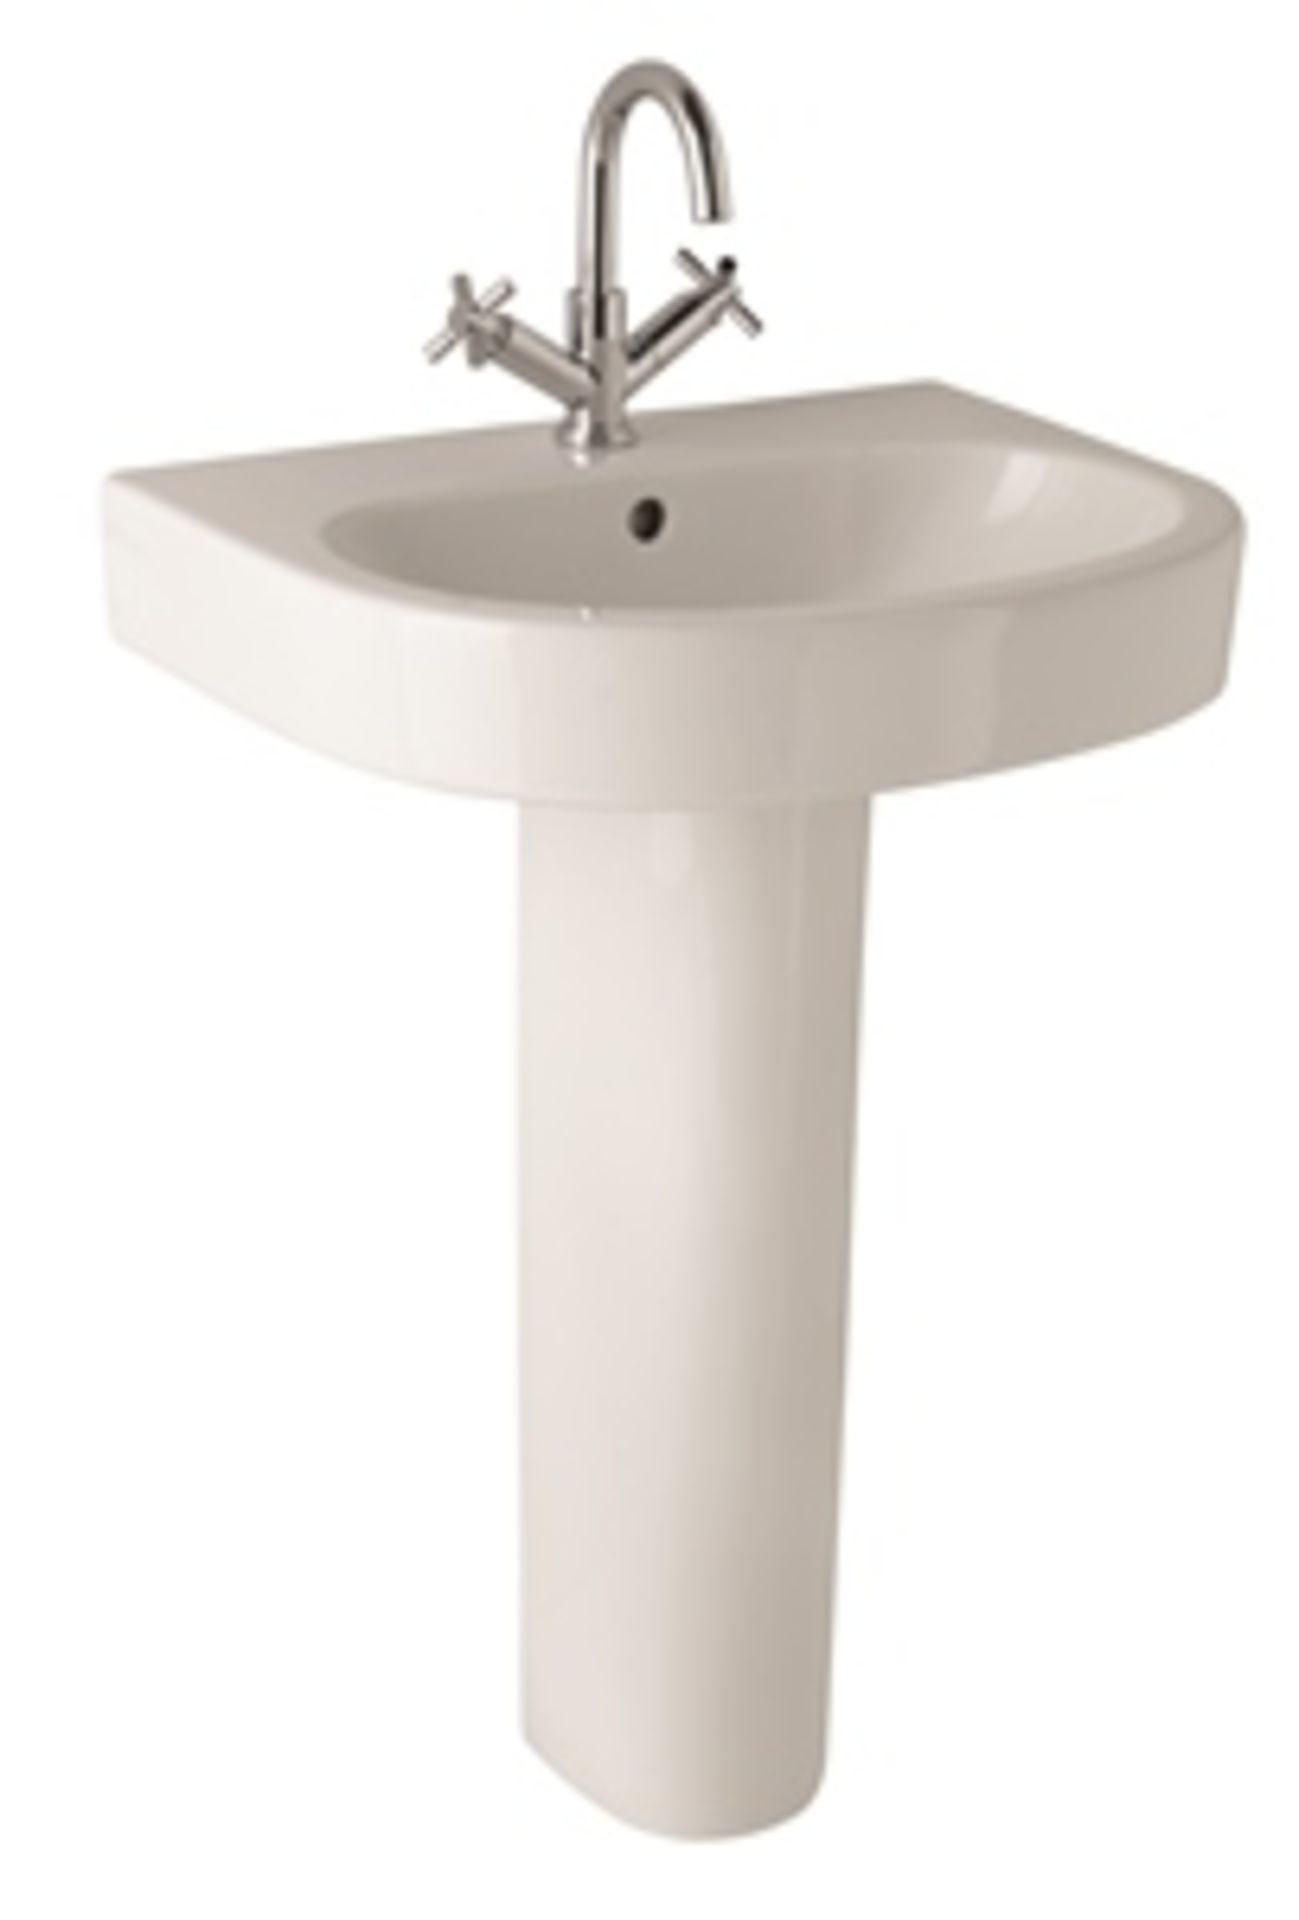 20 x Vogue Bathrooms COSMOS Single Tap Hole SINK BASINS With Pedestals - 600mm Width - Brand New - Image 2 of 2